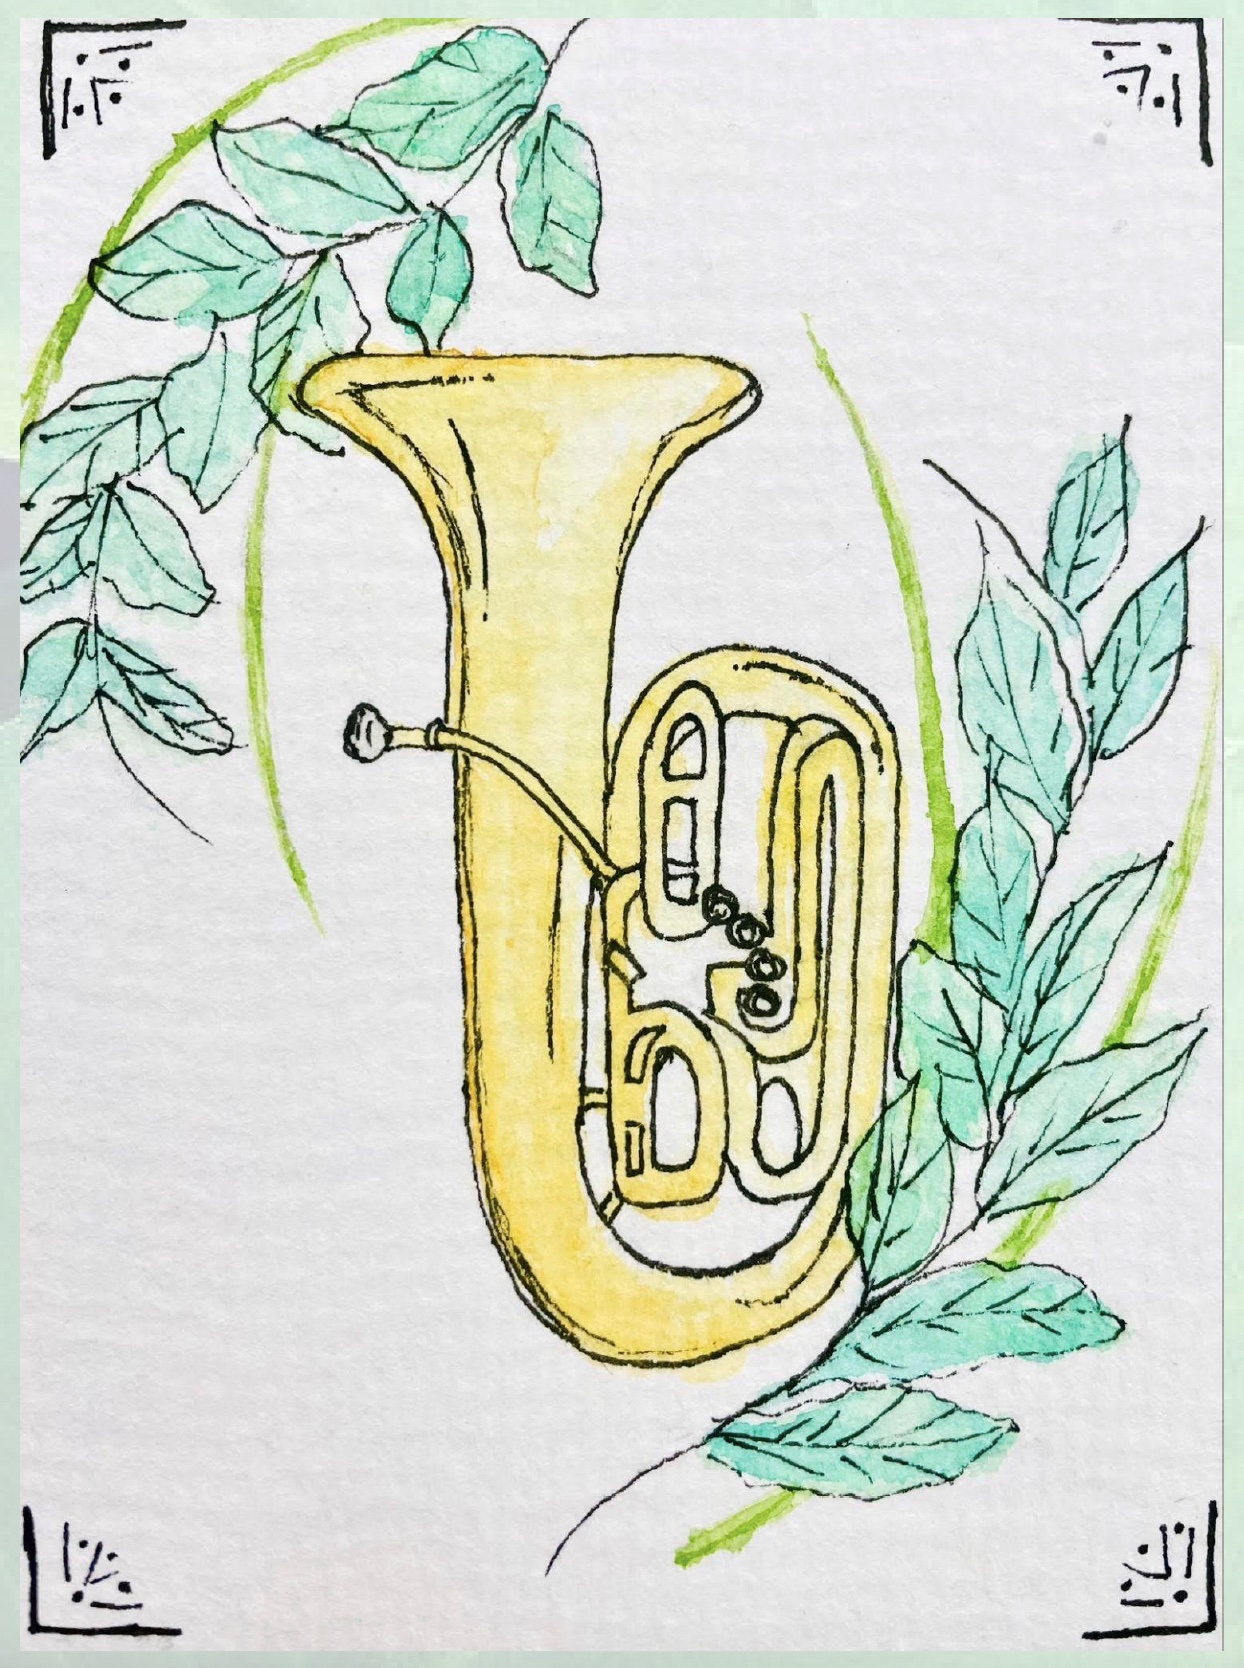 Ink drawing of a tuba or euphonium colored with watercolor